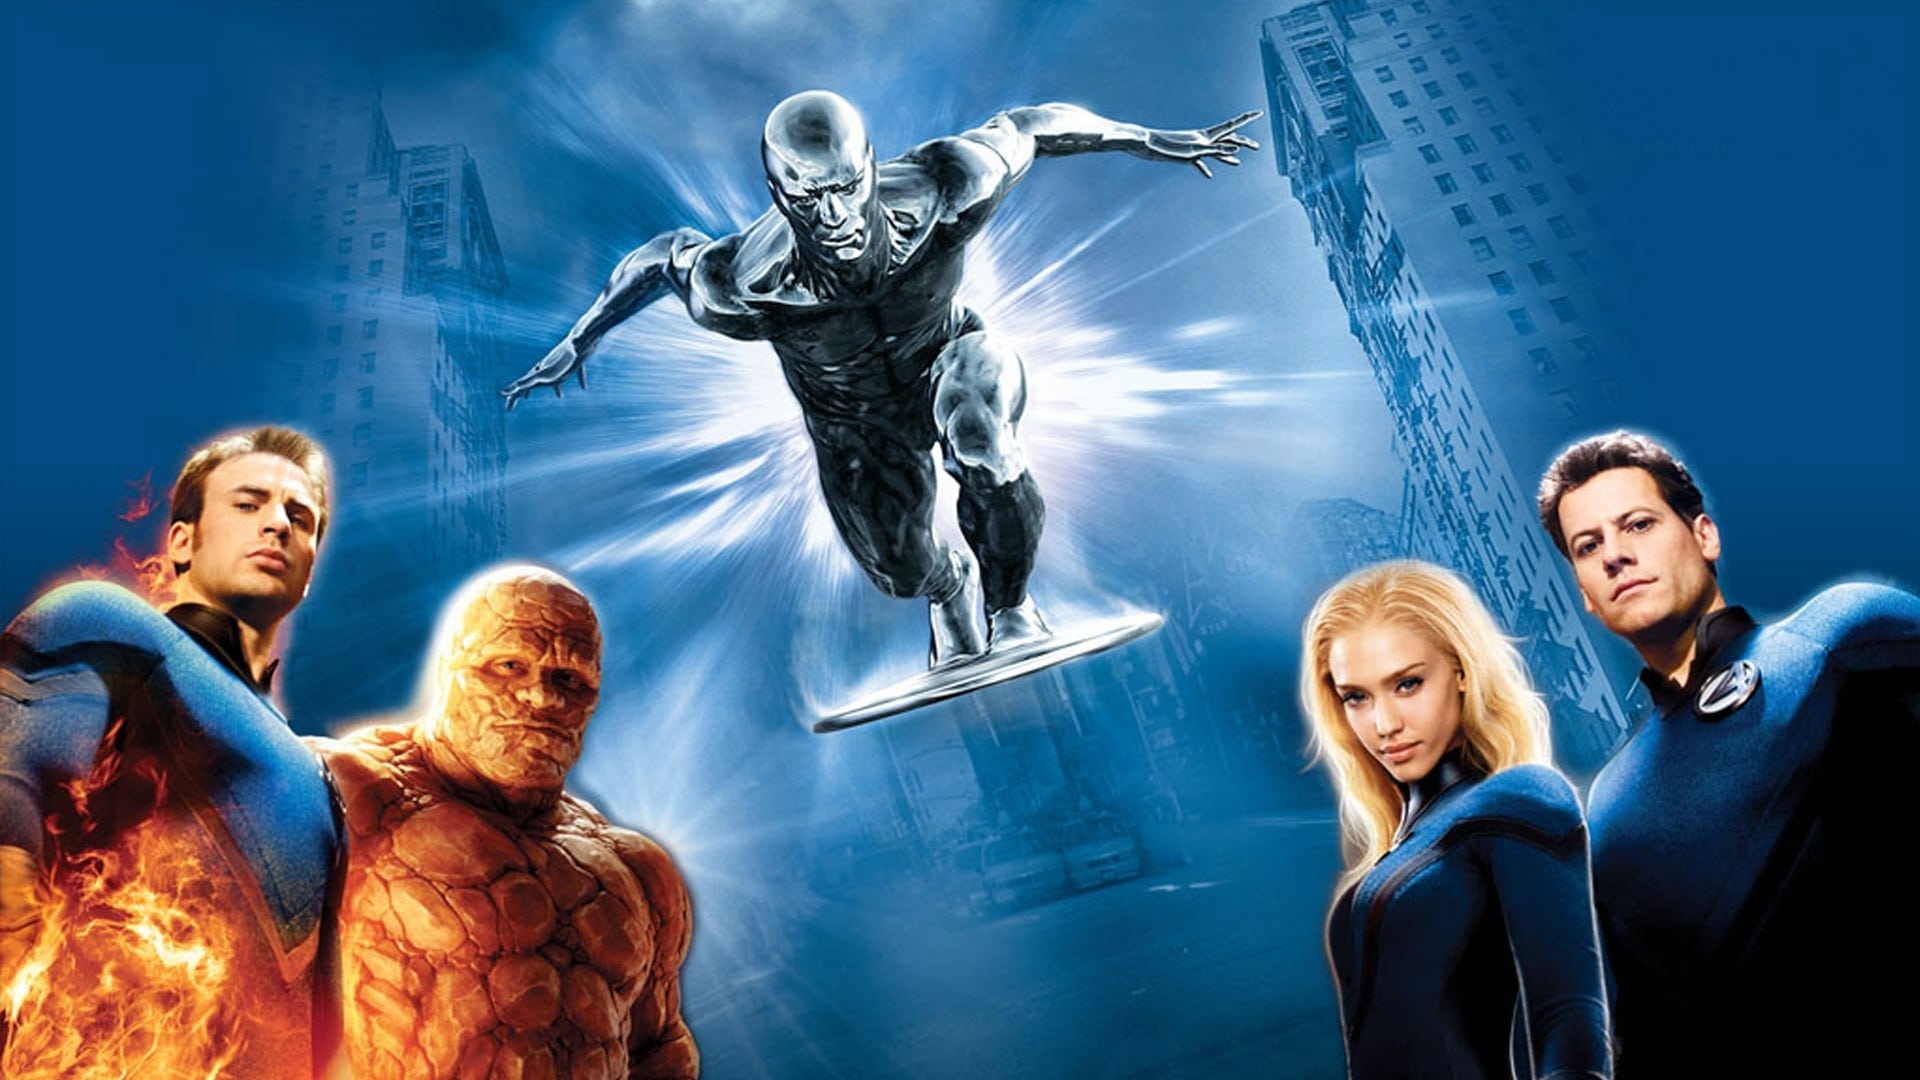 Fantastic Four: Rise of the Silver Surfer (2007)